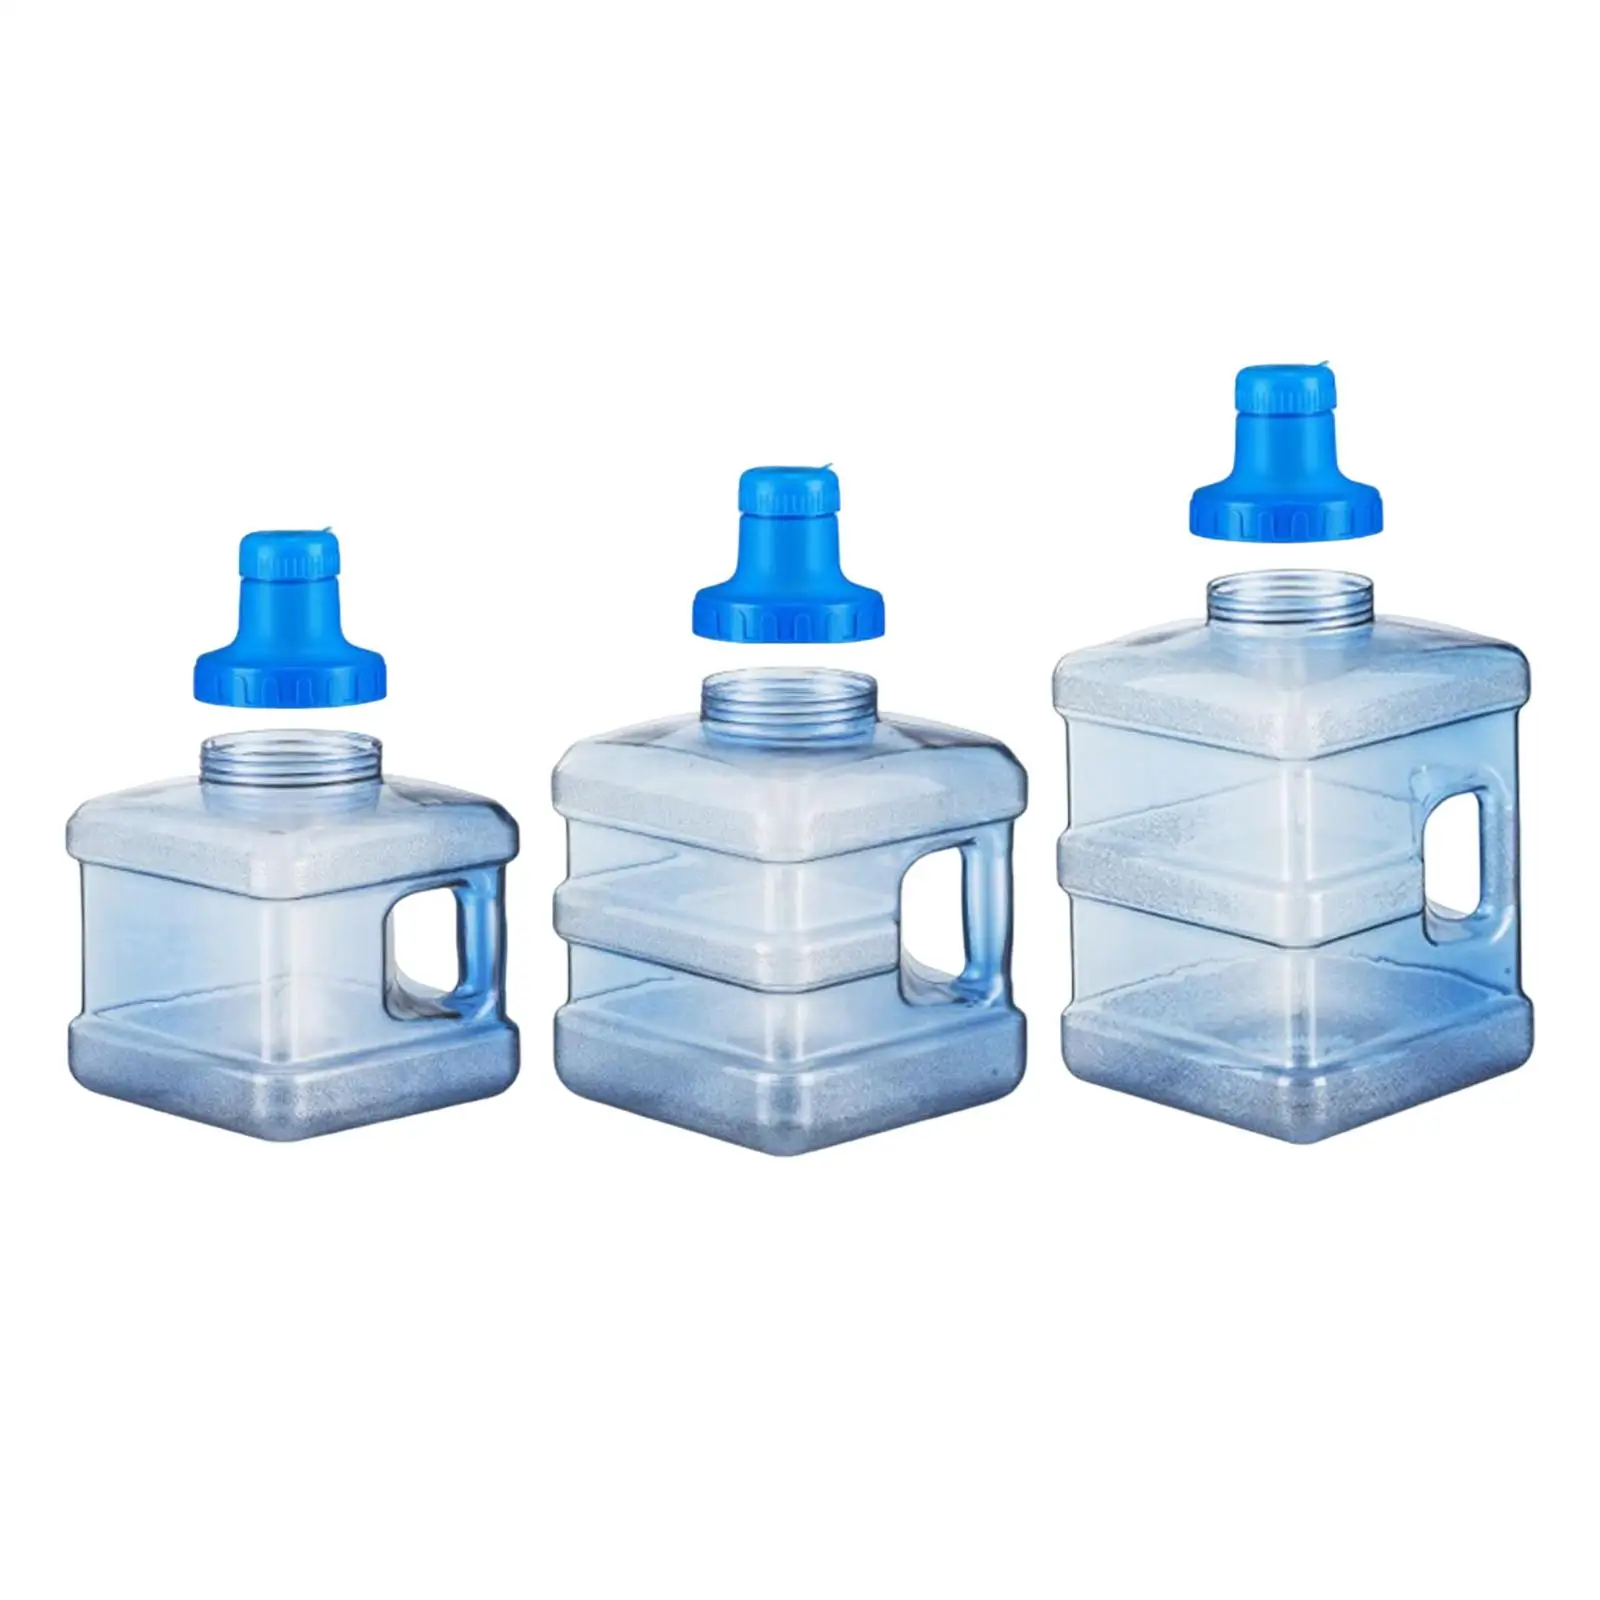 Water Bottle Container Reusable Square Water Bottle with Detachable Cap Blue